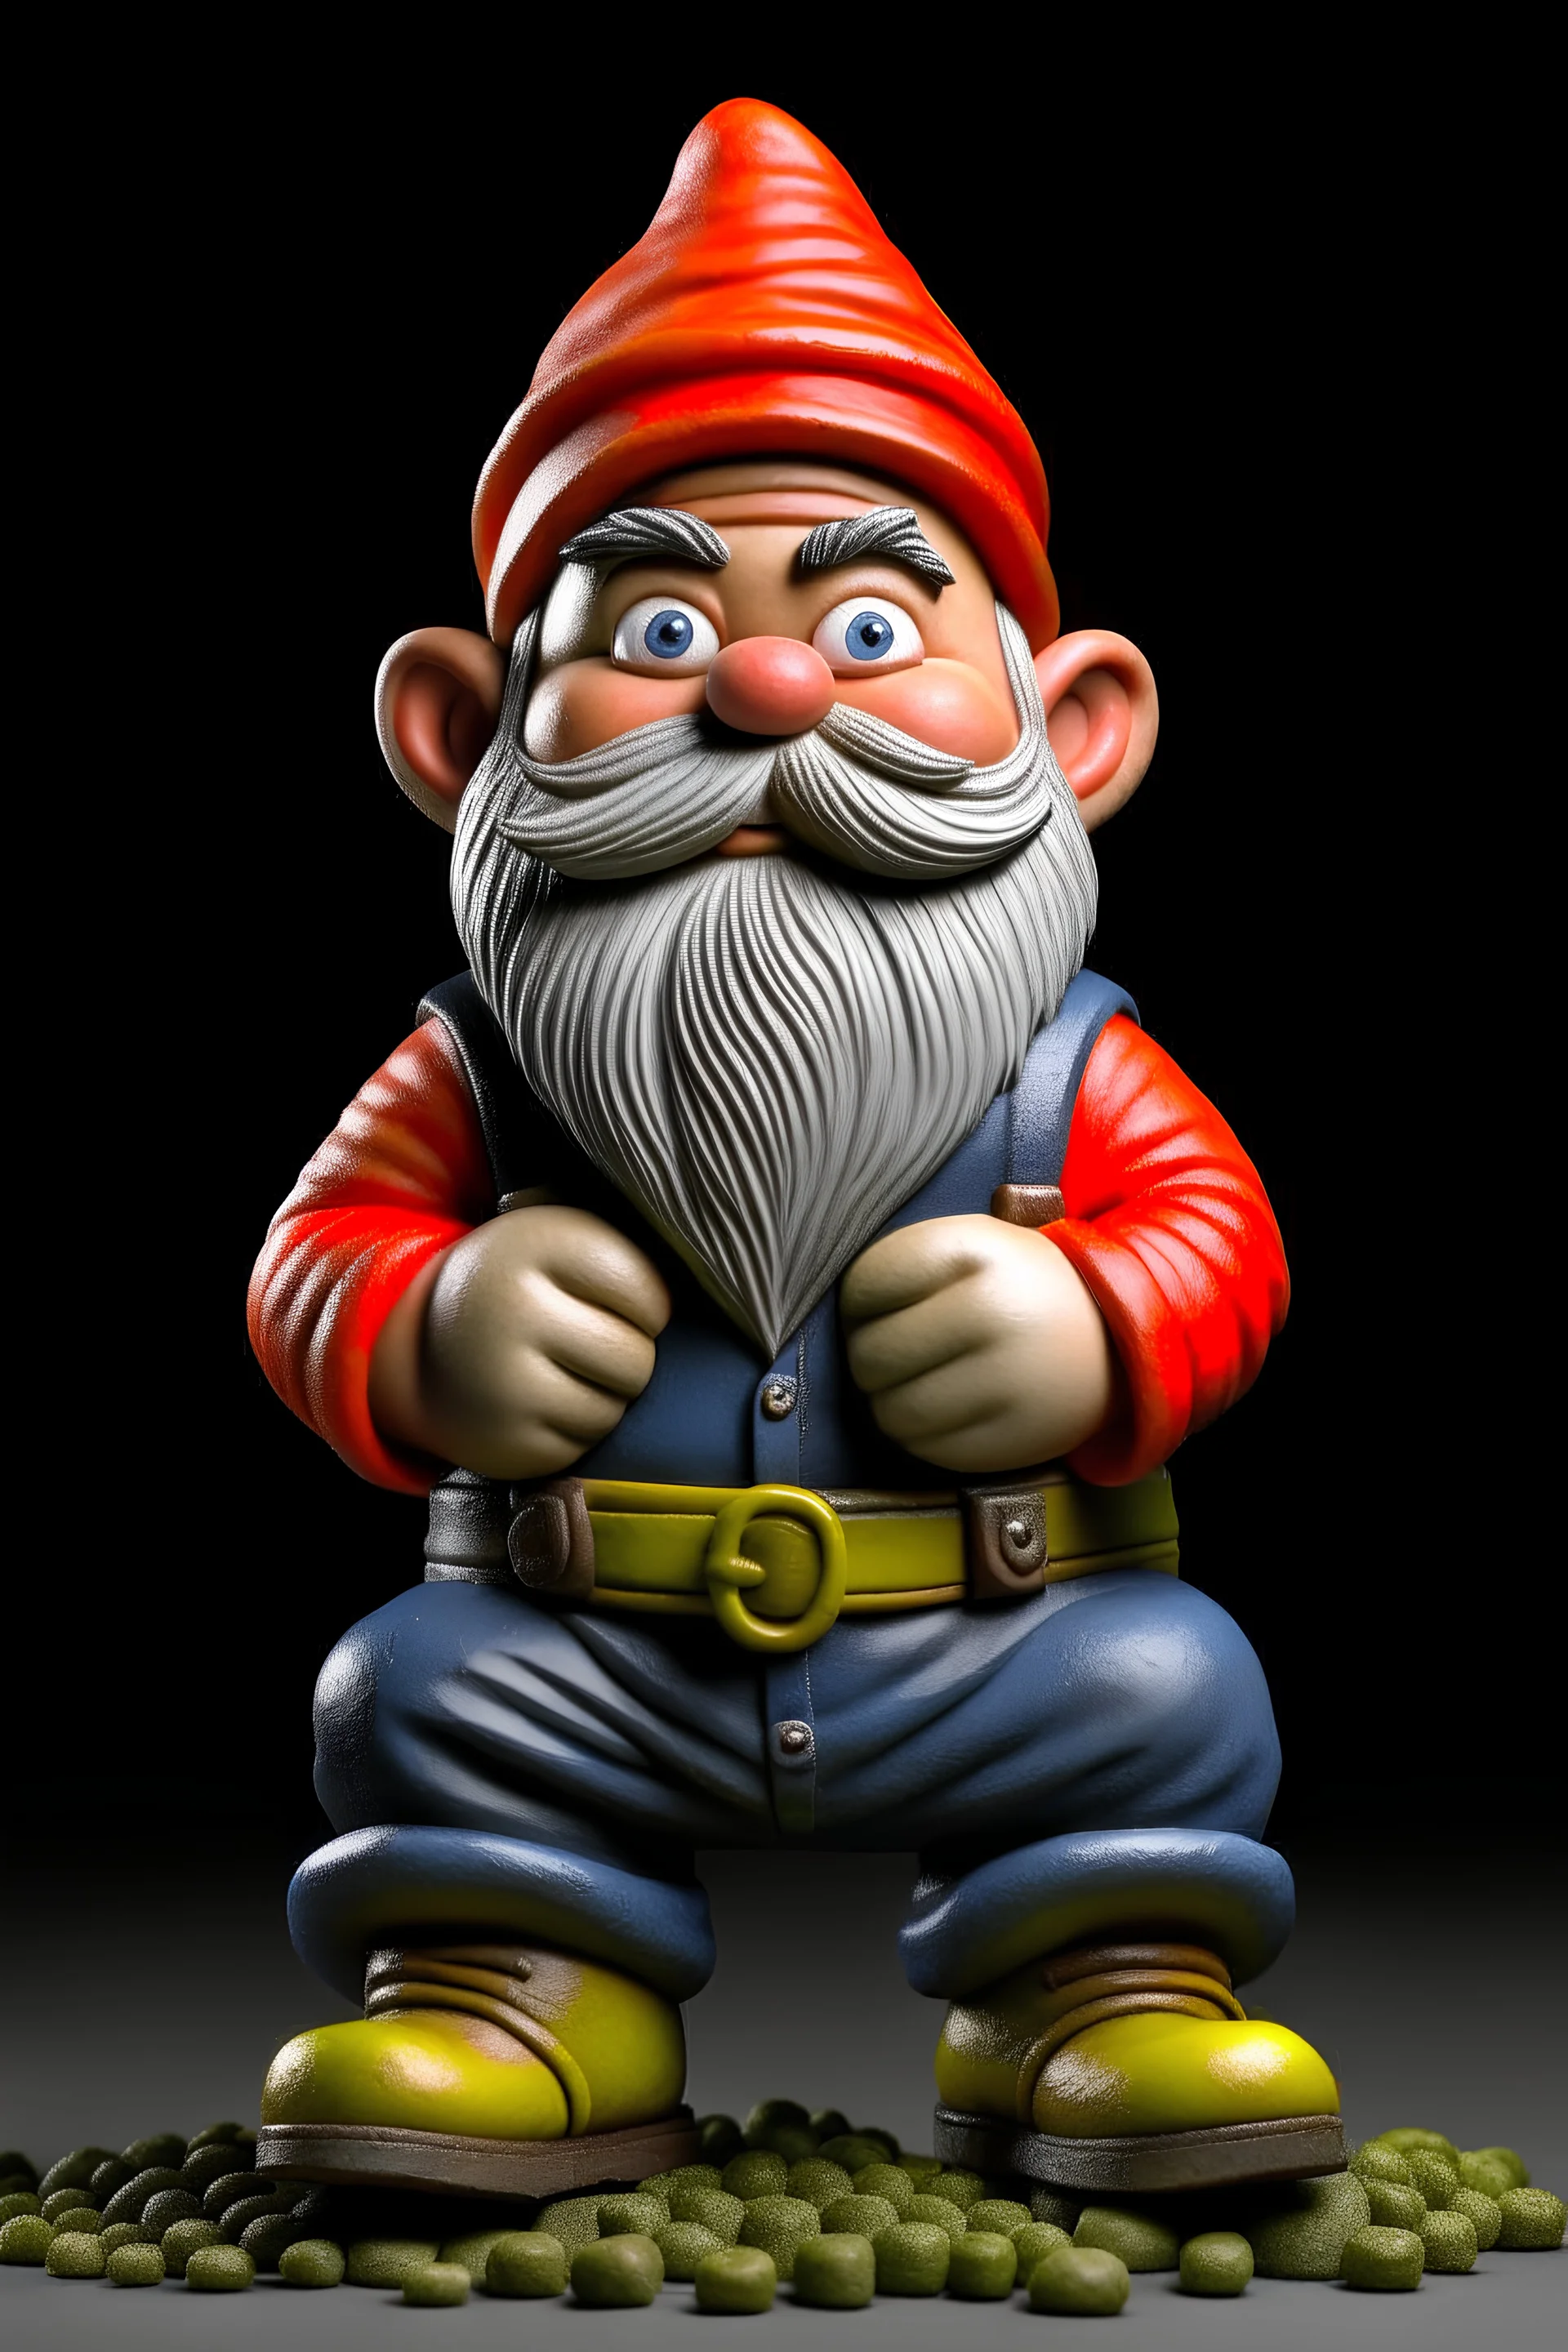 gnome mechanic wearing coveralls